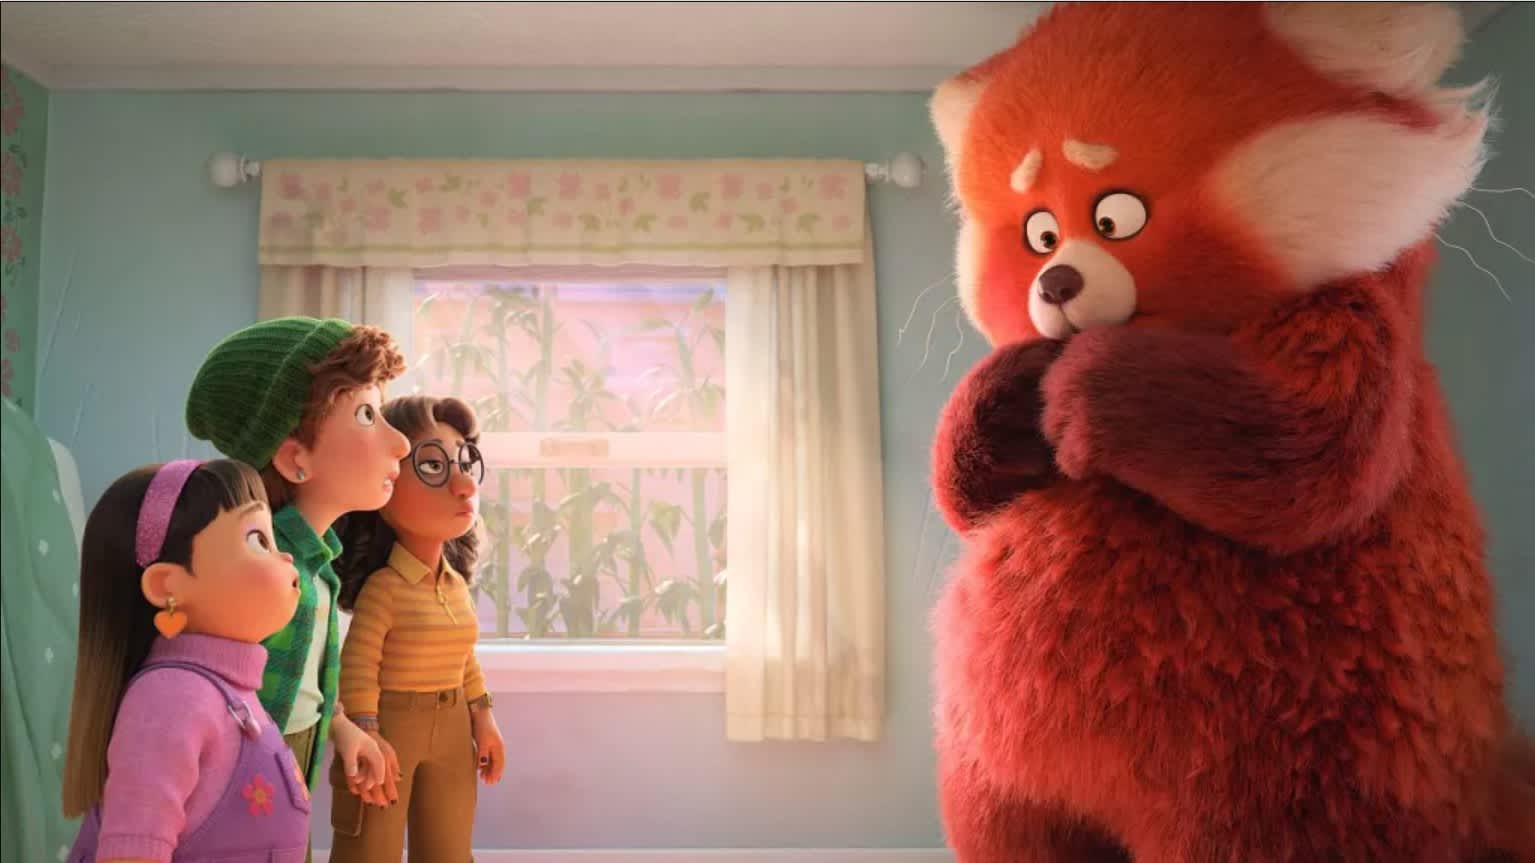 Pixar’s ‘Turning Red’ to skip theaters, head straight to Disney+